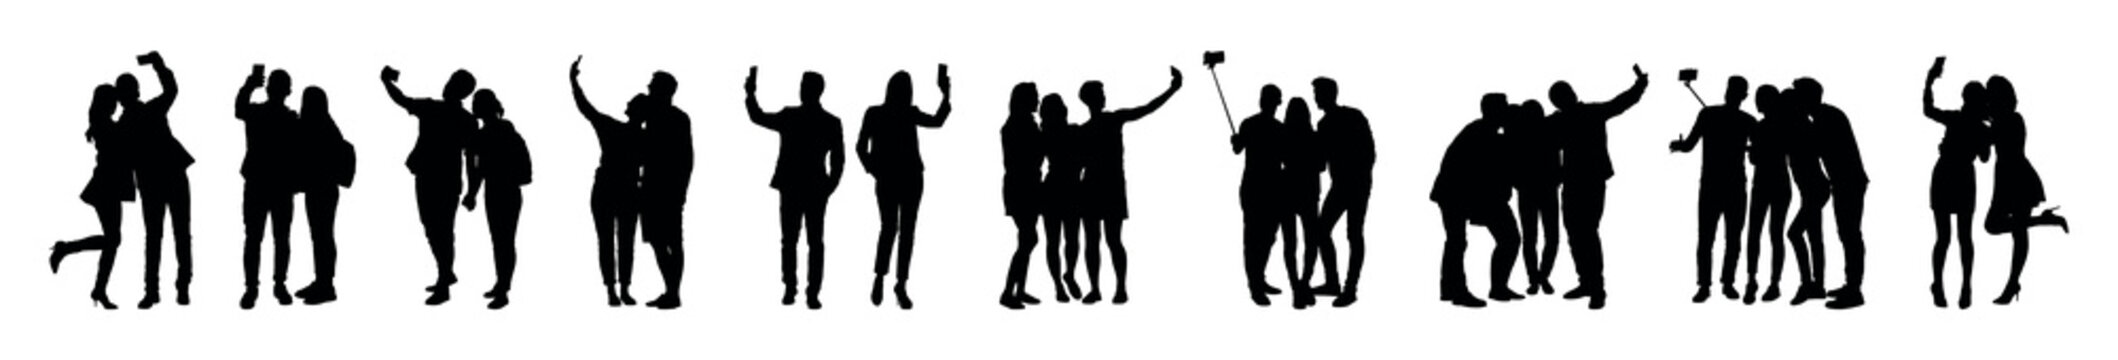 Set silhouettes of people taking selfie in various poses on white background. Group of people selfie vector collection.